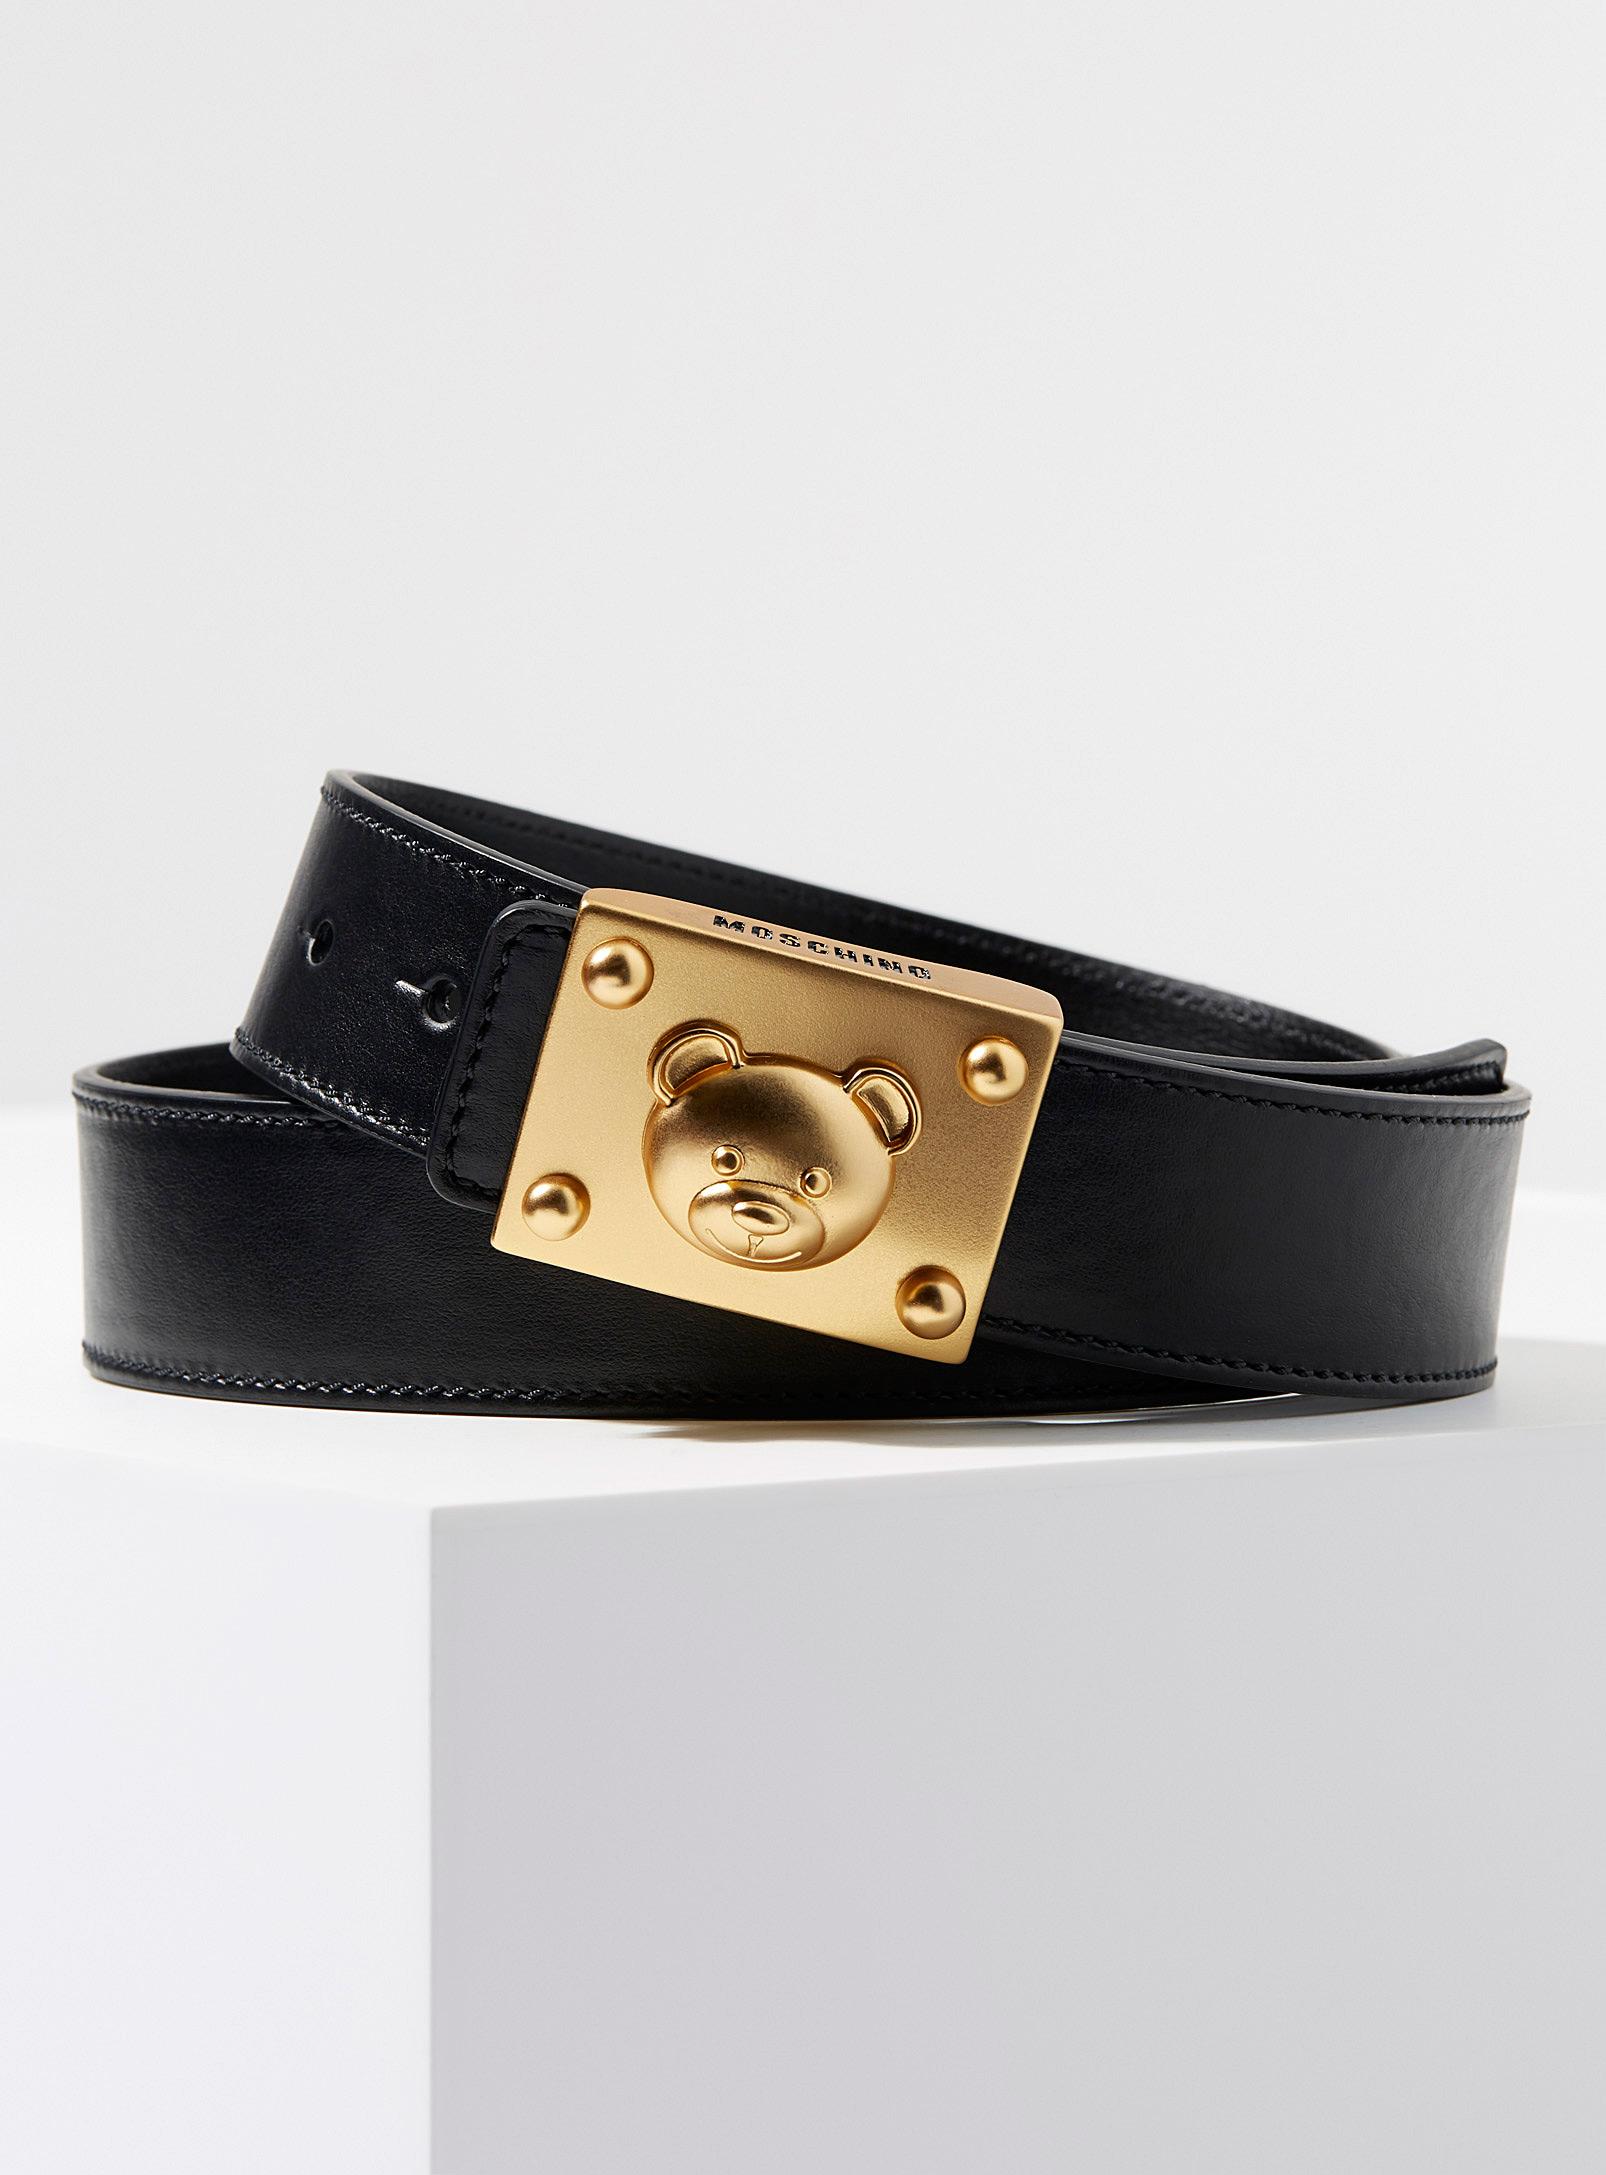 Moschino Leather Signature Teddy Bear Belt in Black for Men - Lyst